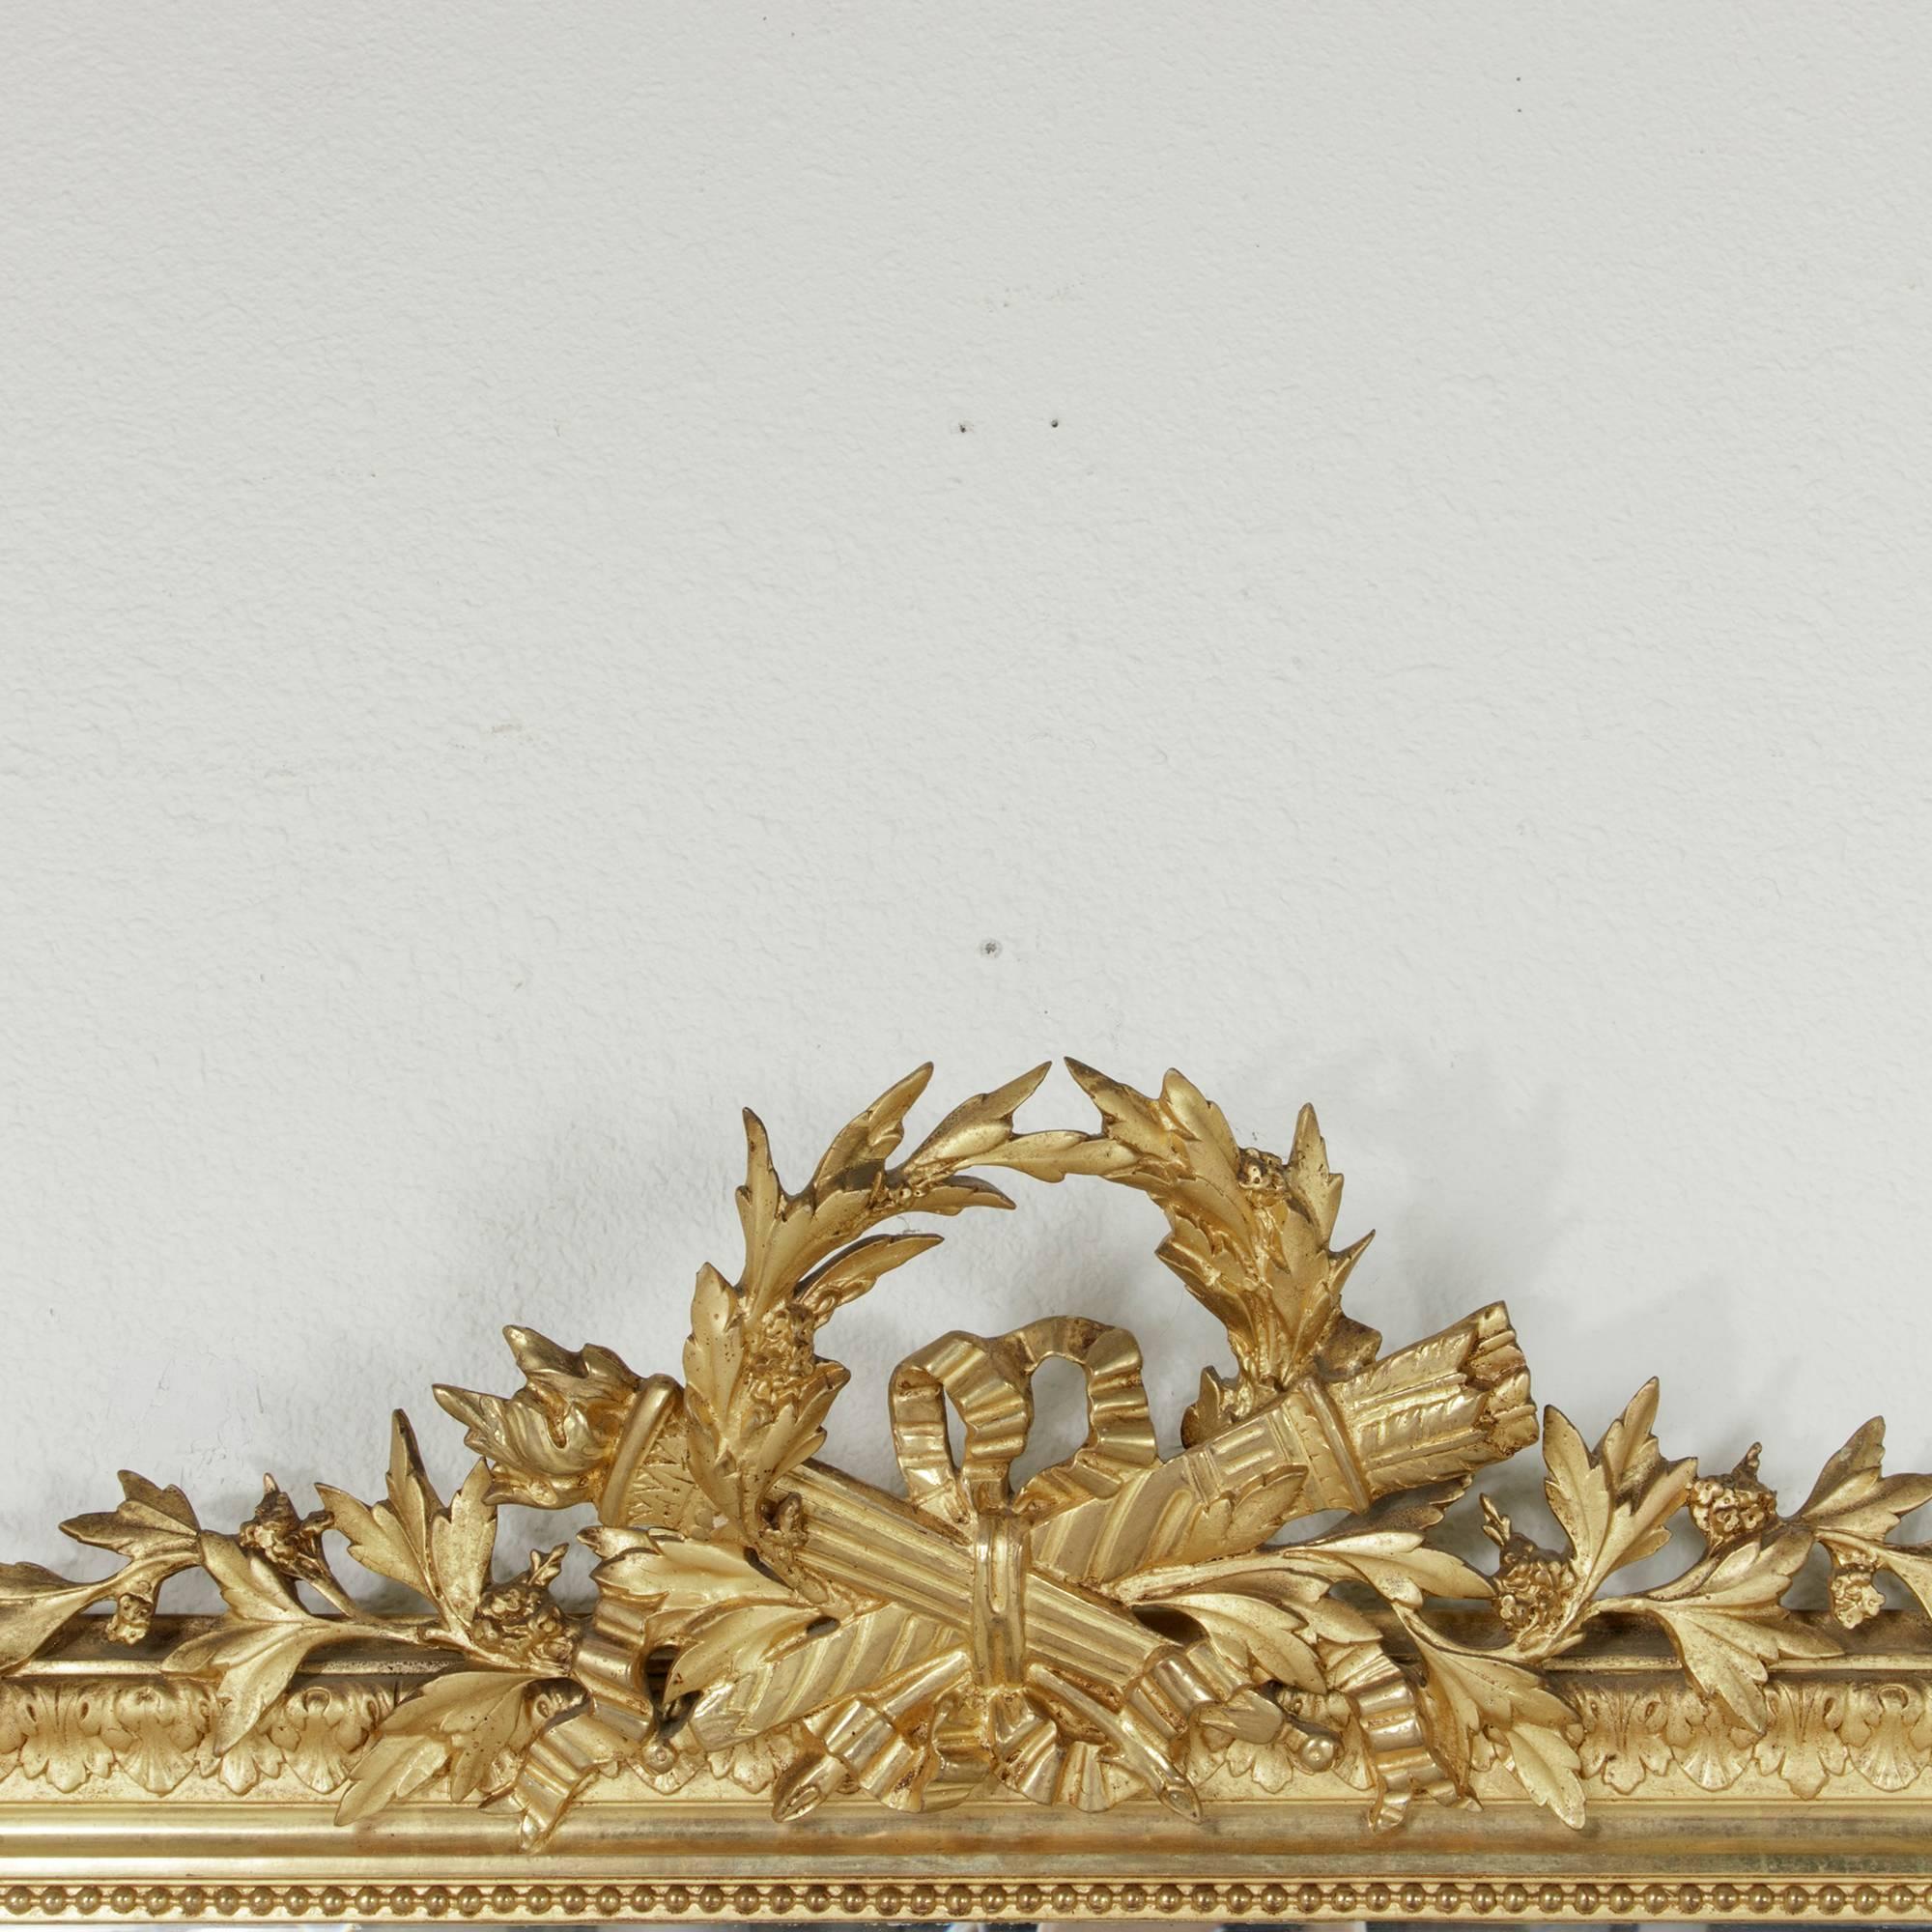 Ideal above a mantel, buffet or chest of drawers, this elegant late 19th century giltwood Louis XVI style mirror boasts its original beveled glass. Its ornate frame is hand-carved with Classic Louis XVI acanthus leaves and a border of fine beading.